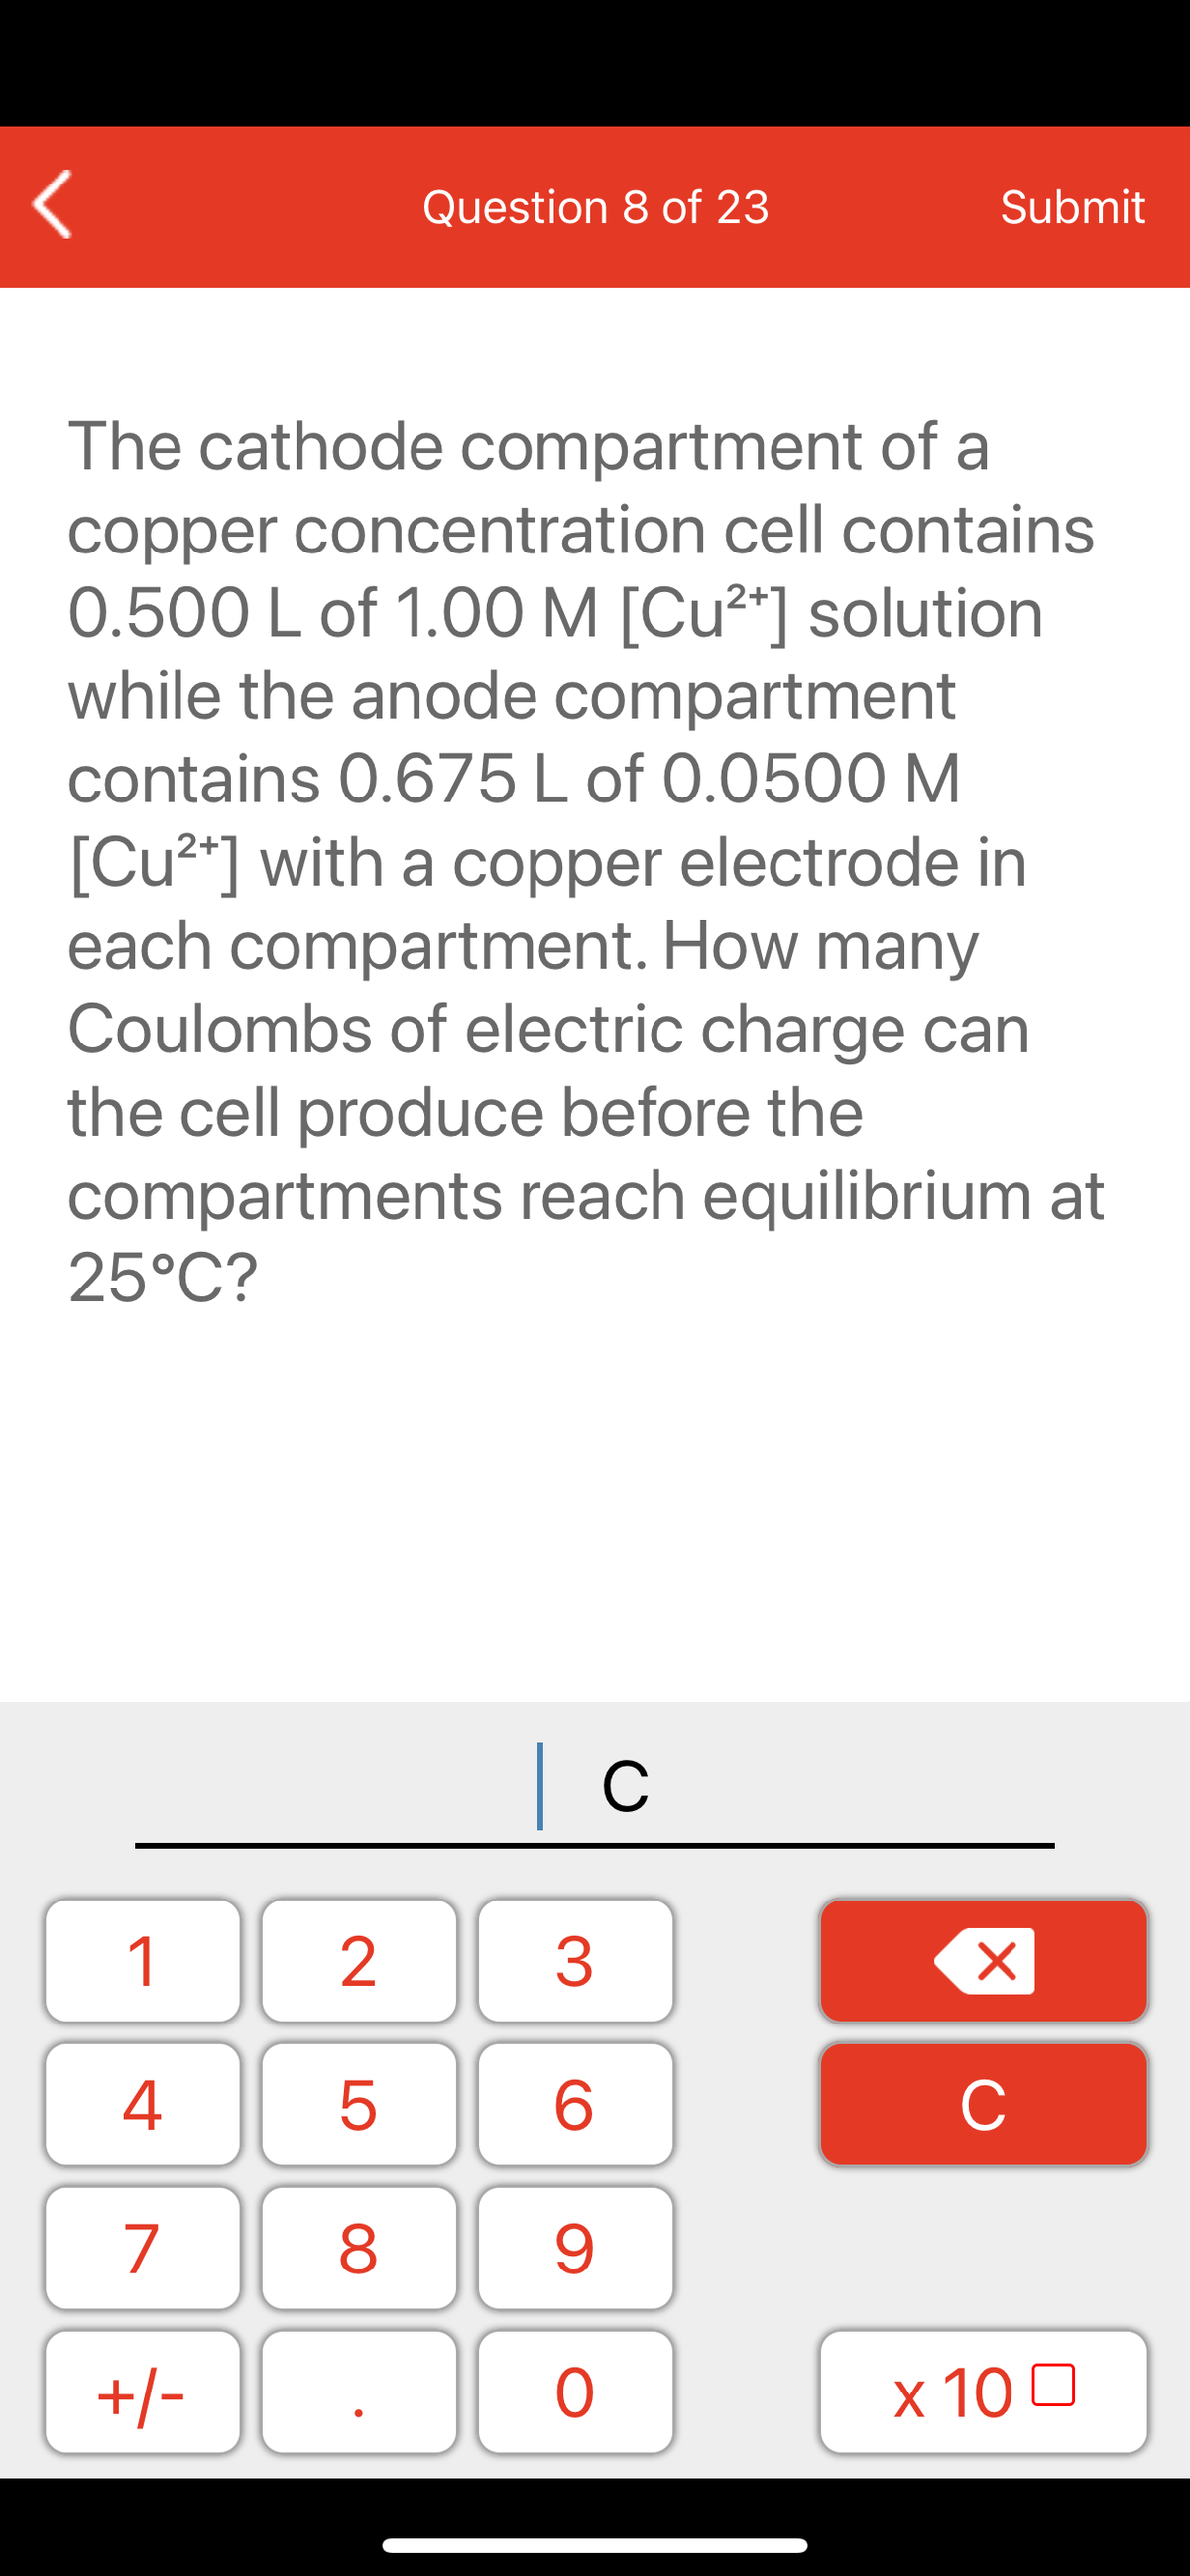 Question 8 of 23
Submit
The cathode compartment of a
copper concentration cell contains
0.500 L of 1.00 M [Cu²*] solution
while the anode compartment
contains 0.675L of 0.0500 M
[Cu²*] with a copper electrode in
each compartment. How many
Coulombs of electric charge can
the cell produce before the
compartments reach equilibrium at
25°C?
| c
1
2
3
C
7
9.
+/-
x 10 0
LO
00
